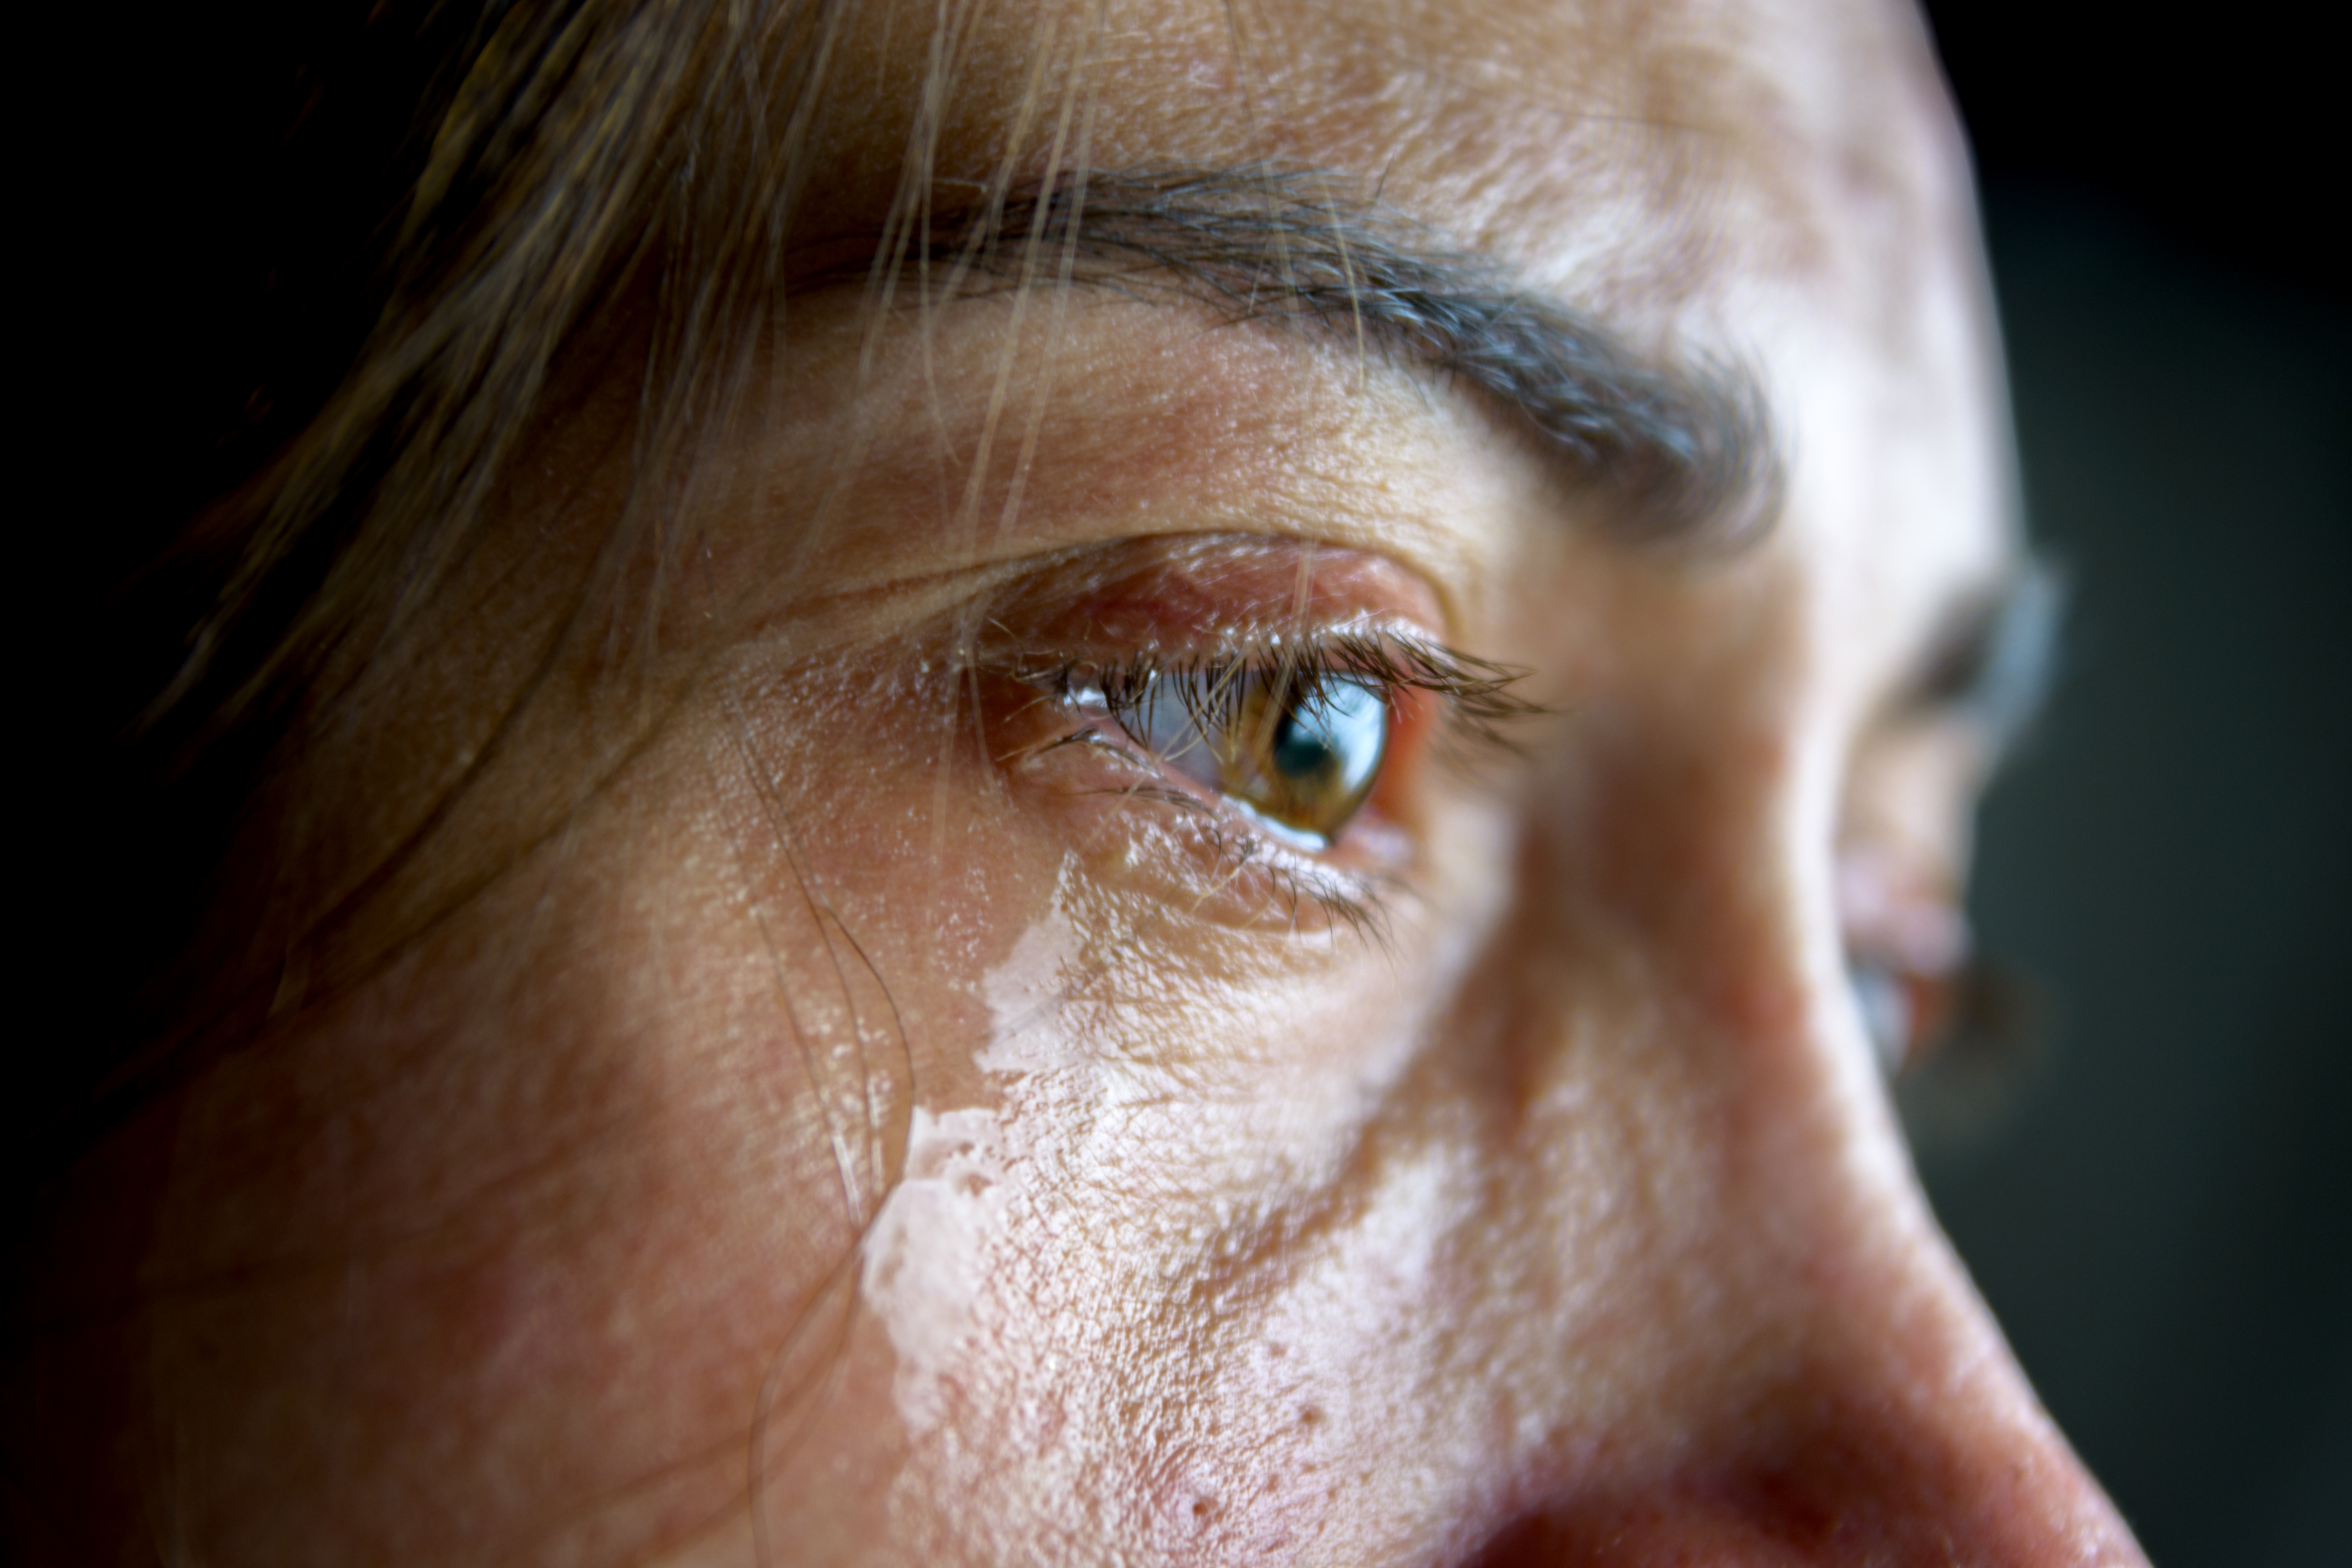 The woman is crying | Source: Shutterstock